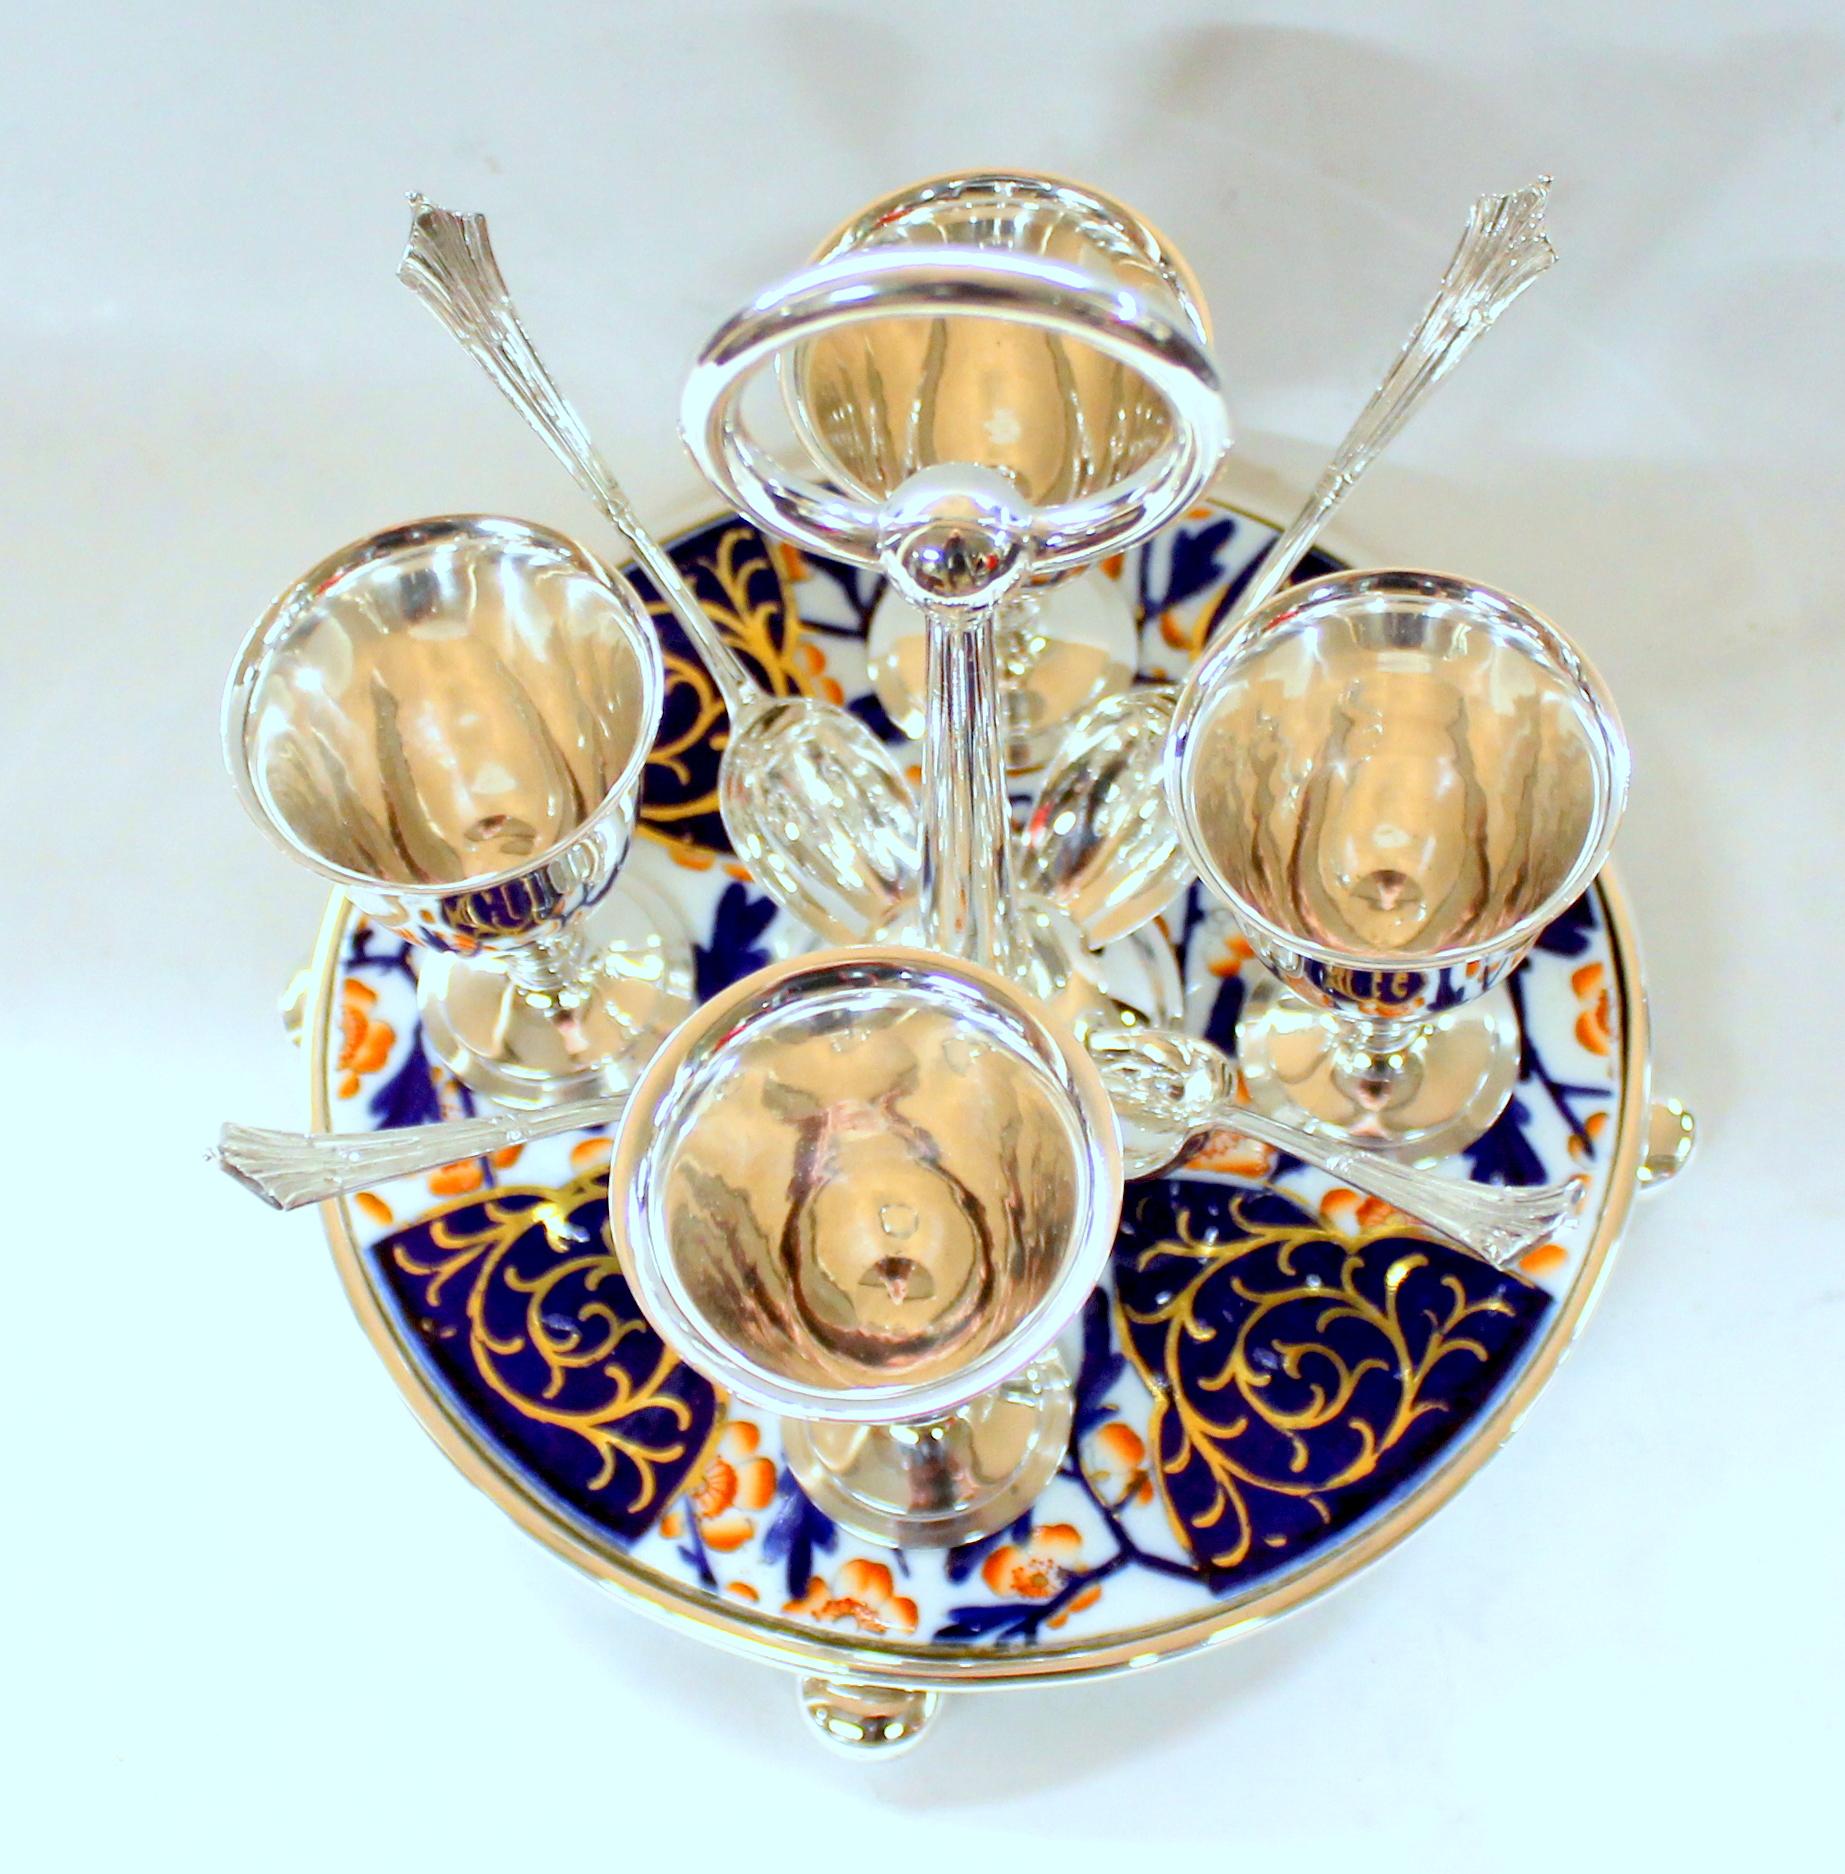 Very fine and rare old english silver plate egg cruet with spoons on an original imari porcelain base. Spoons are in the 